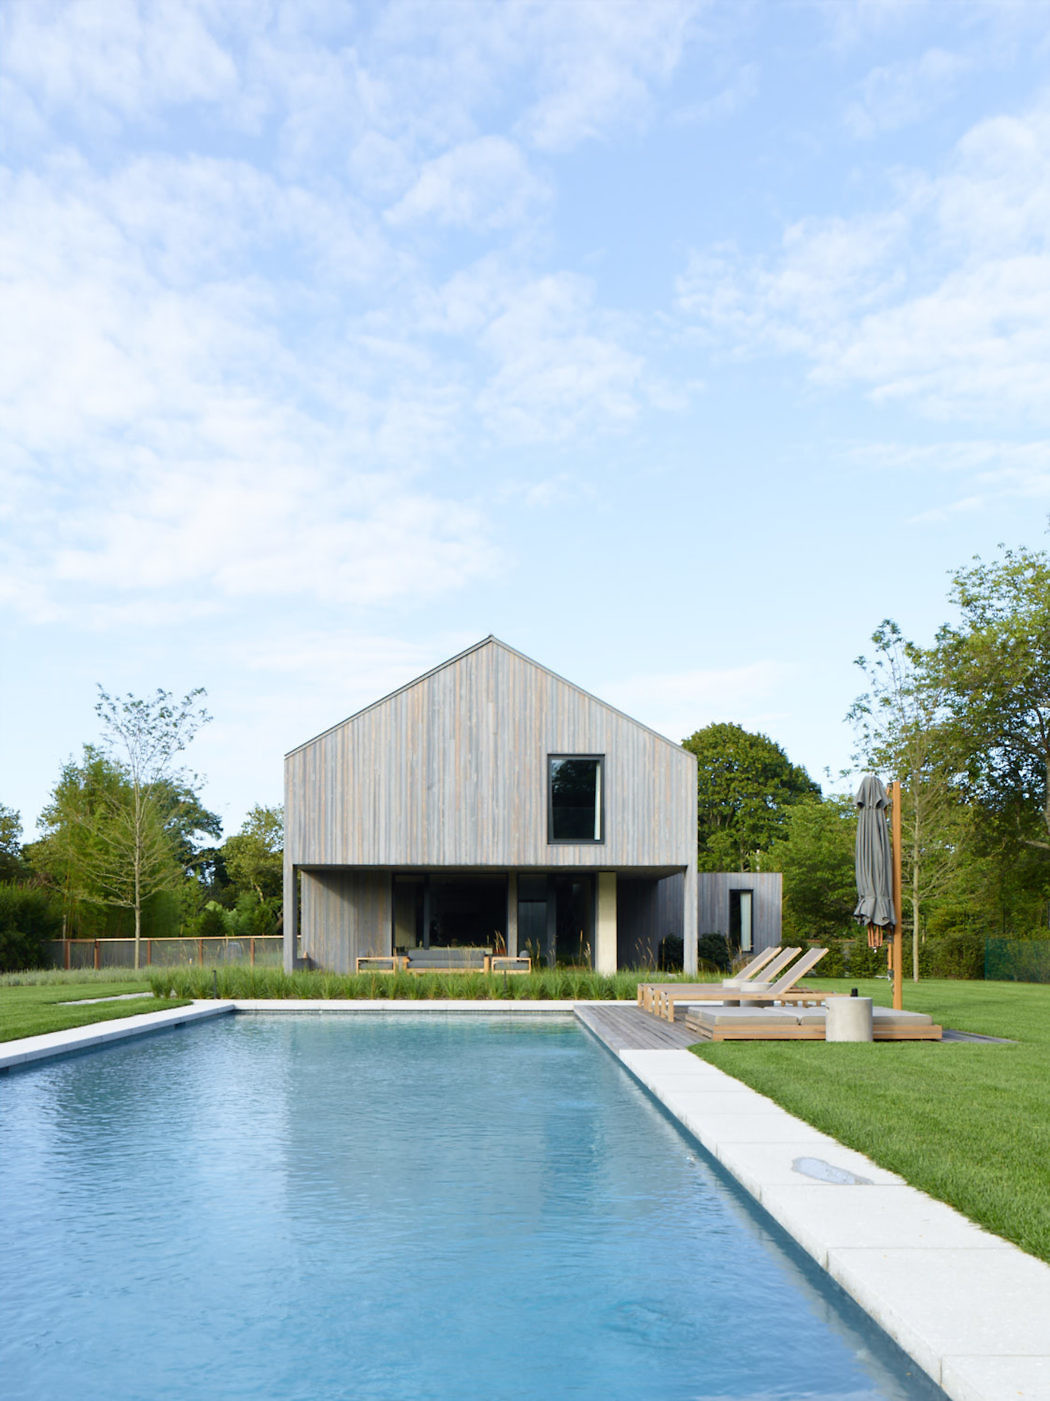 There's a large pool in the backyard plus a deck, and the house is clad with natural wood